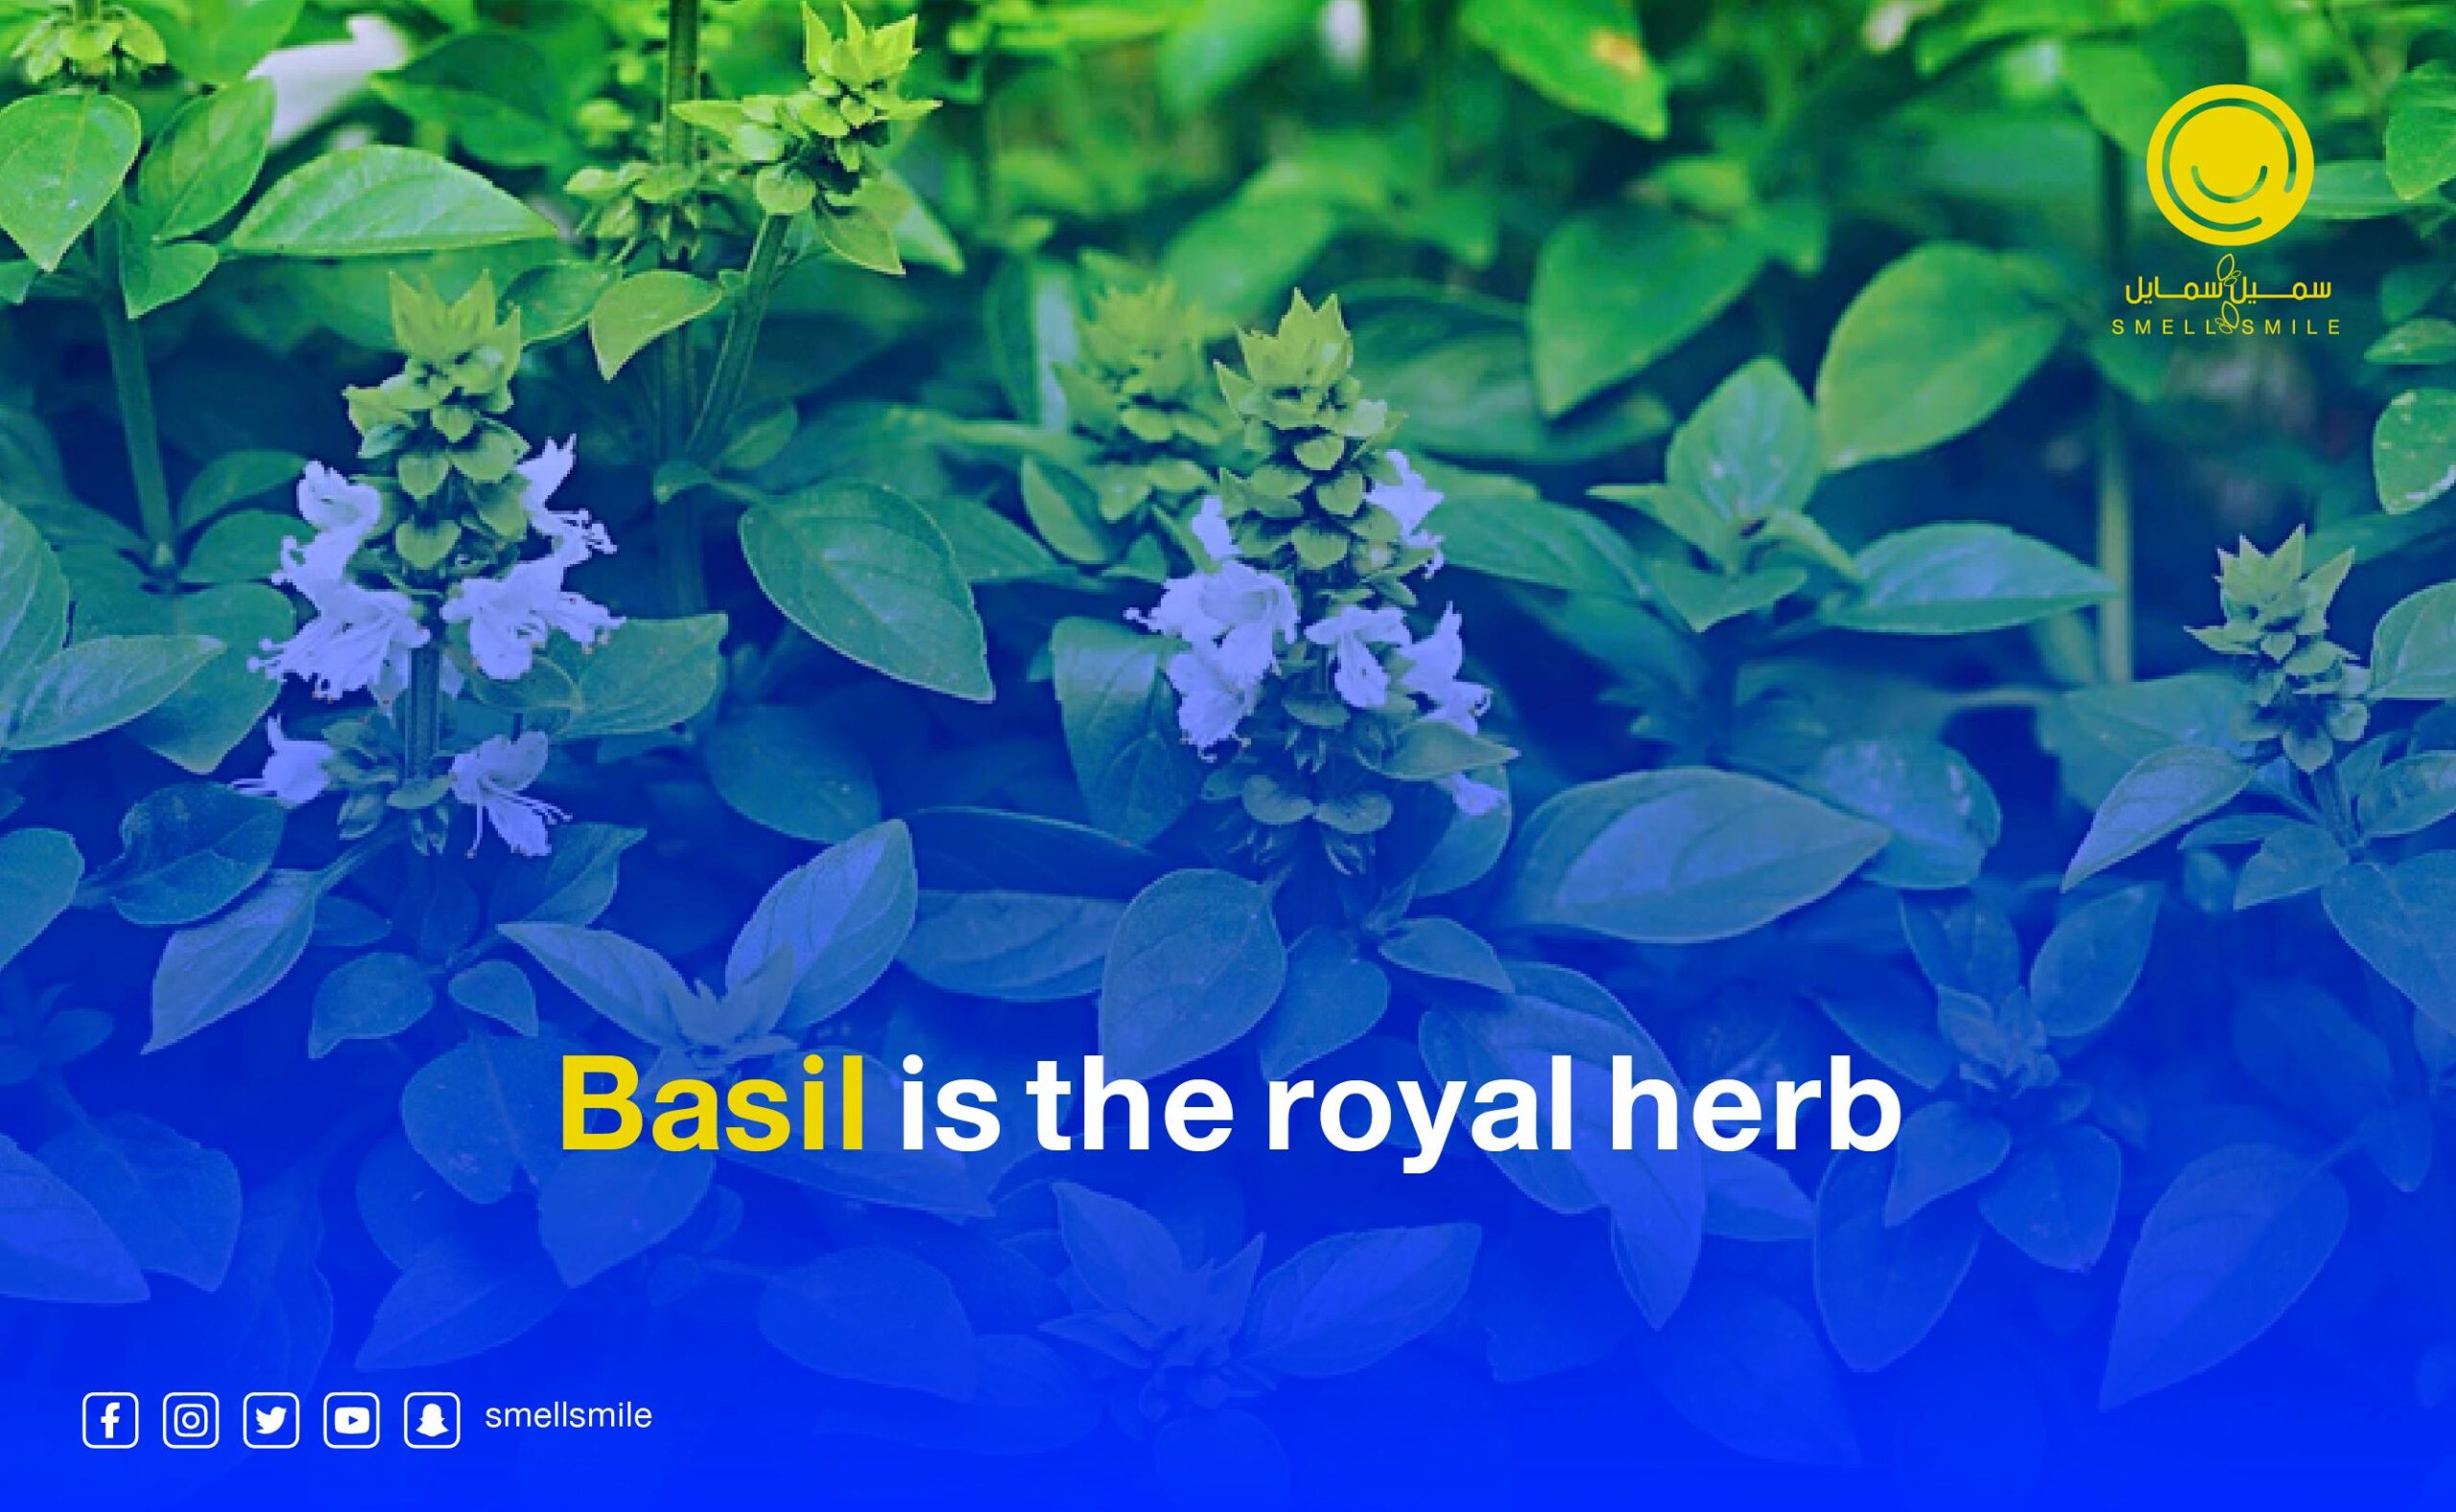 Basil is the royal herb